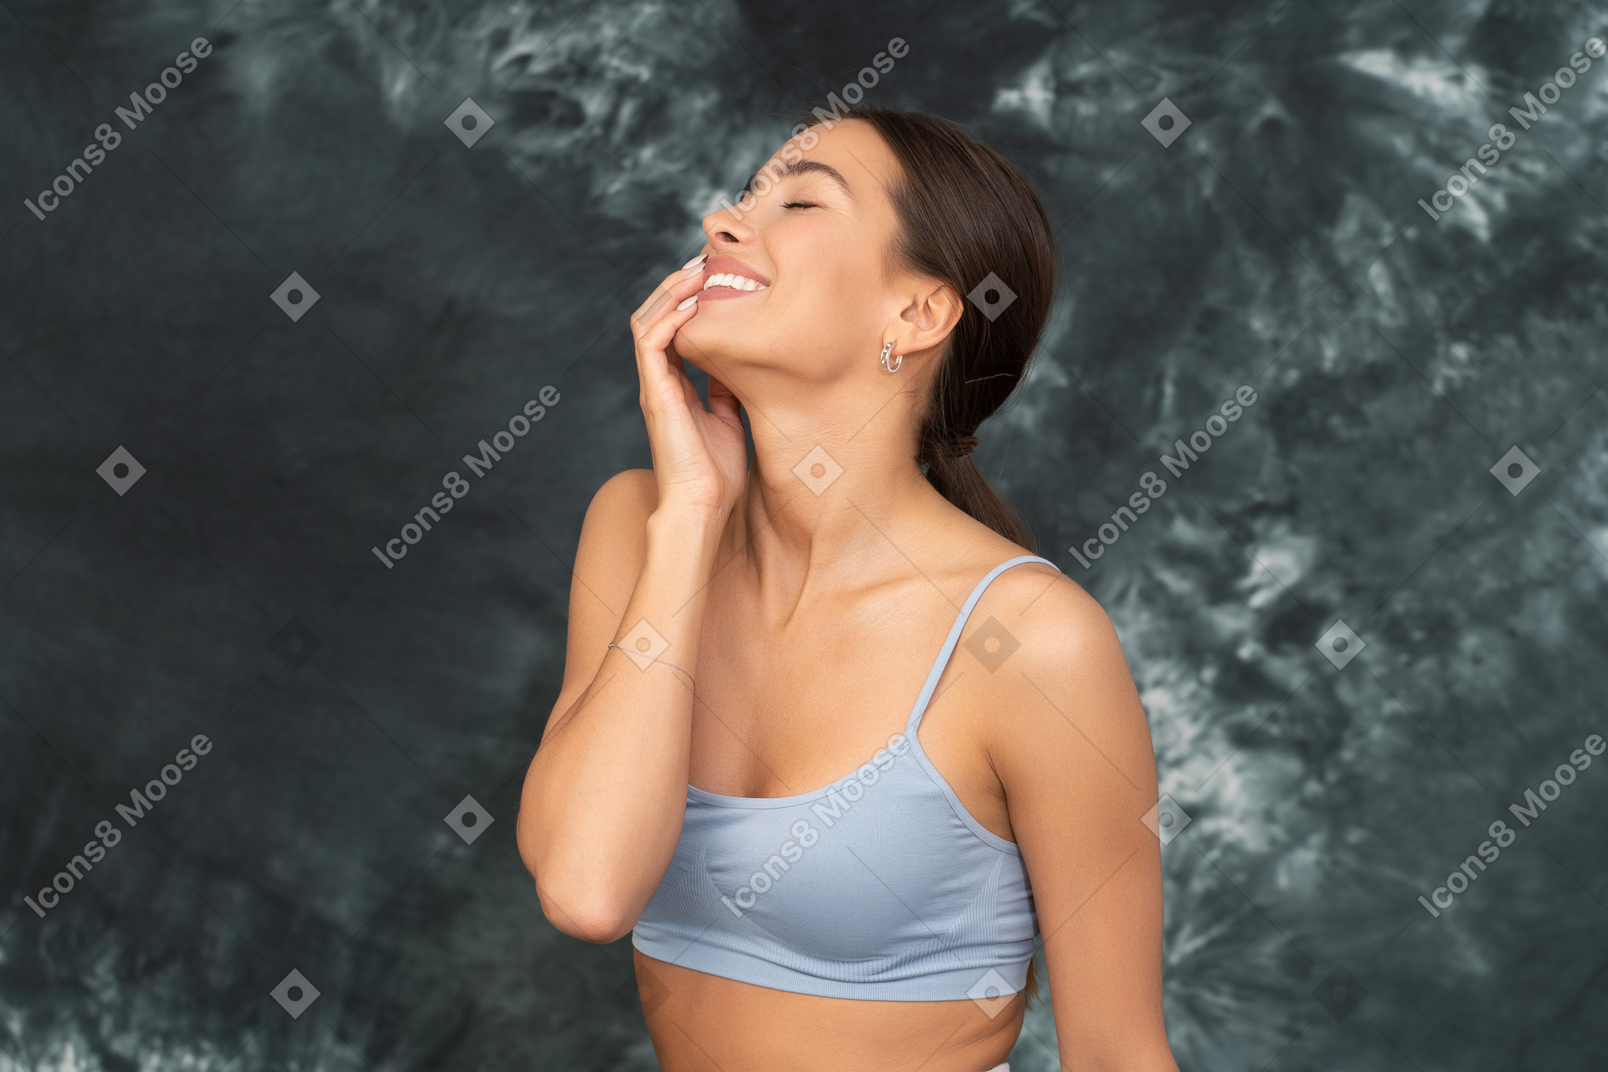 Close-up a smiling woman in sports bra touching her face and smiling